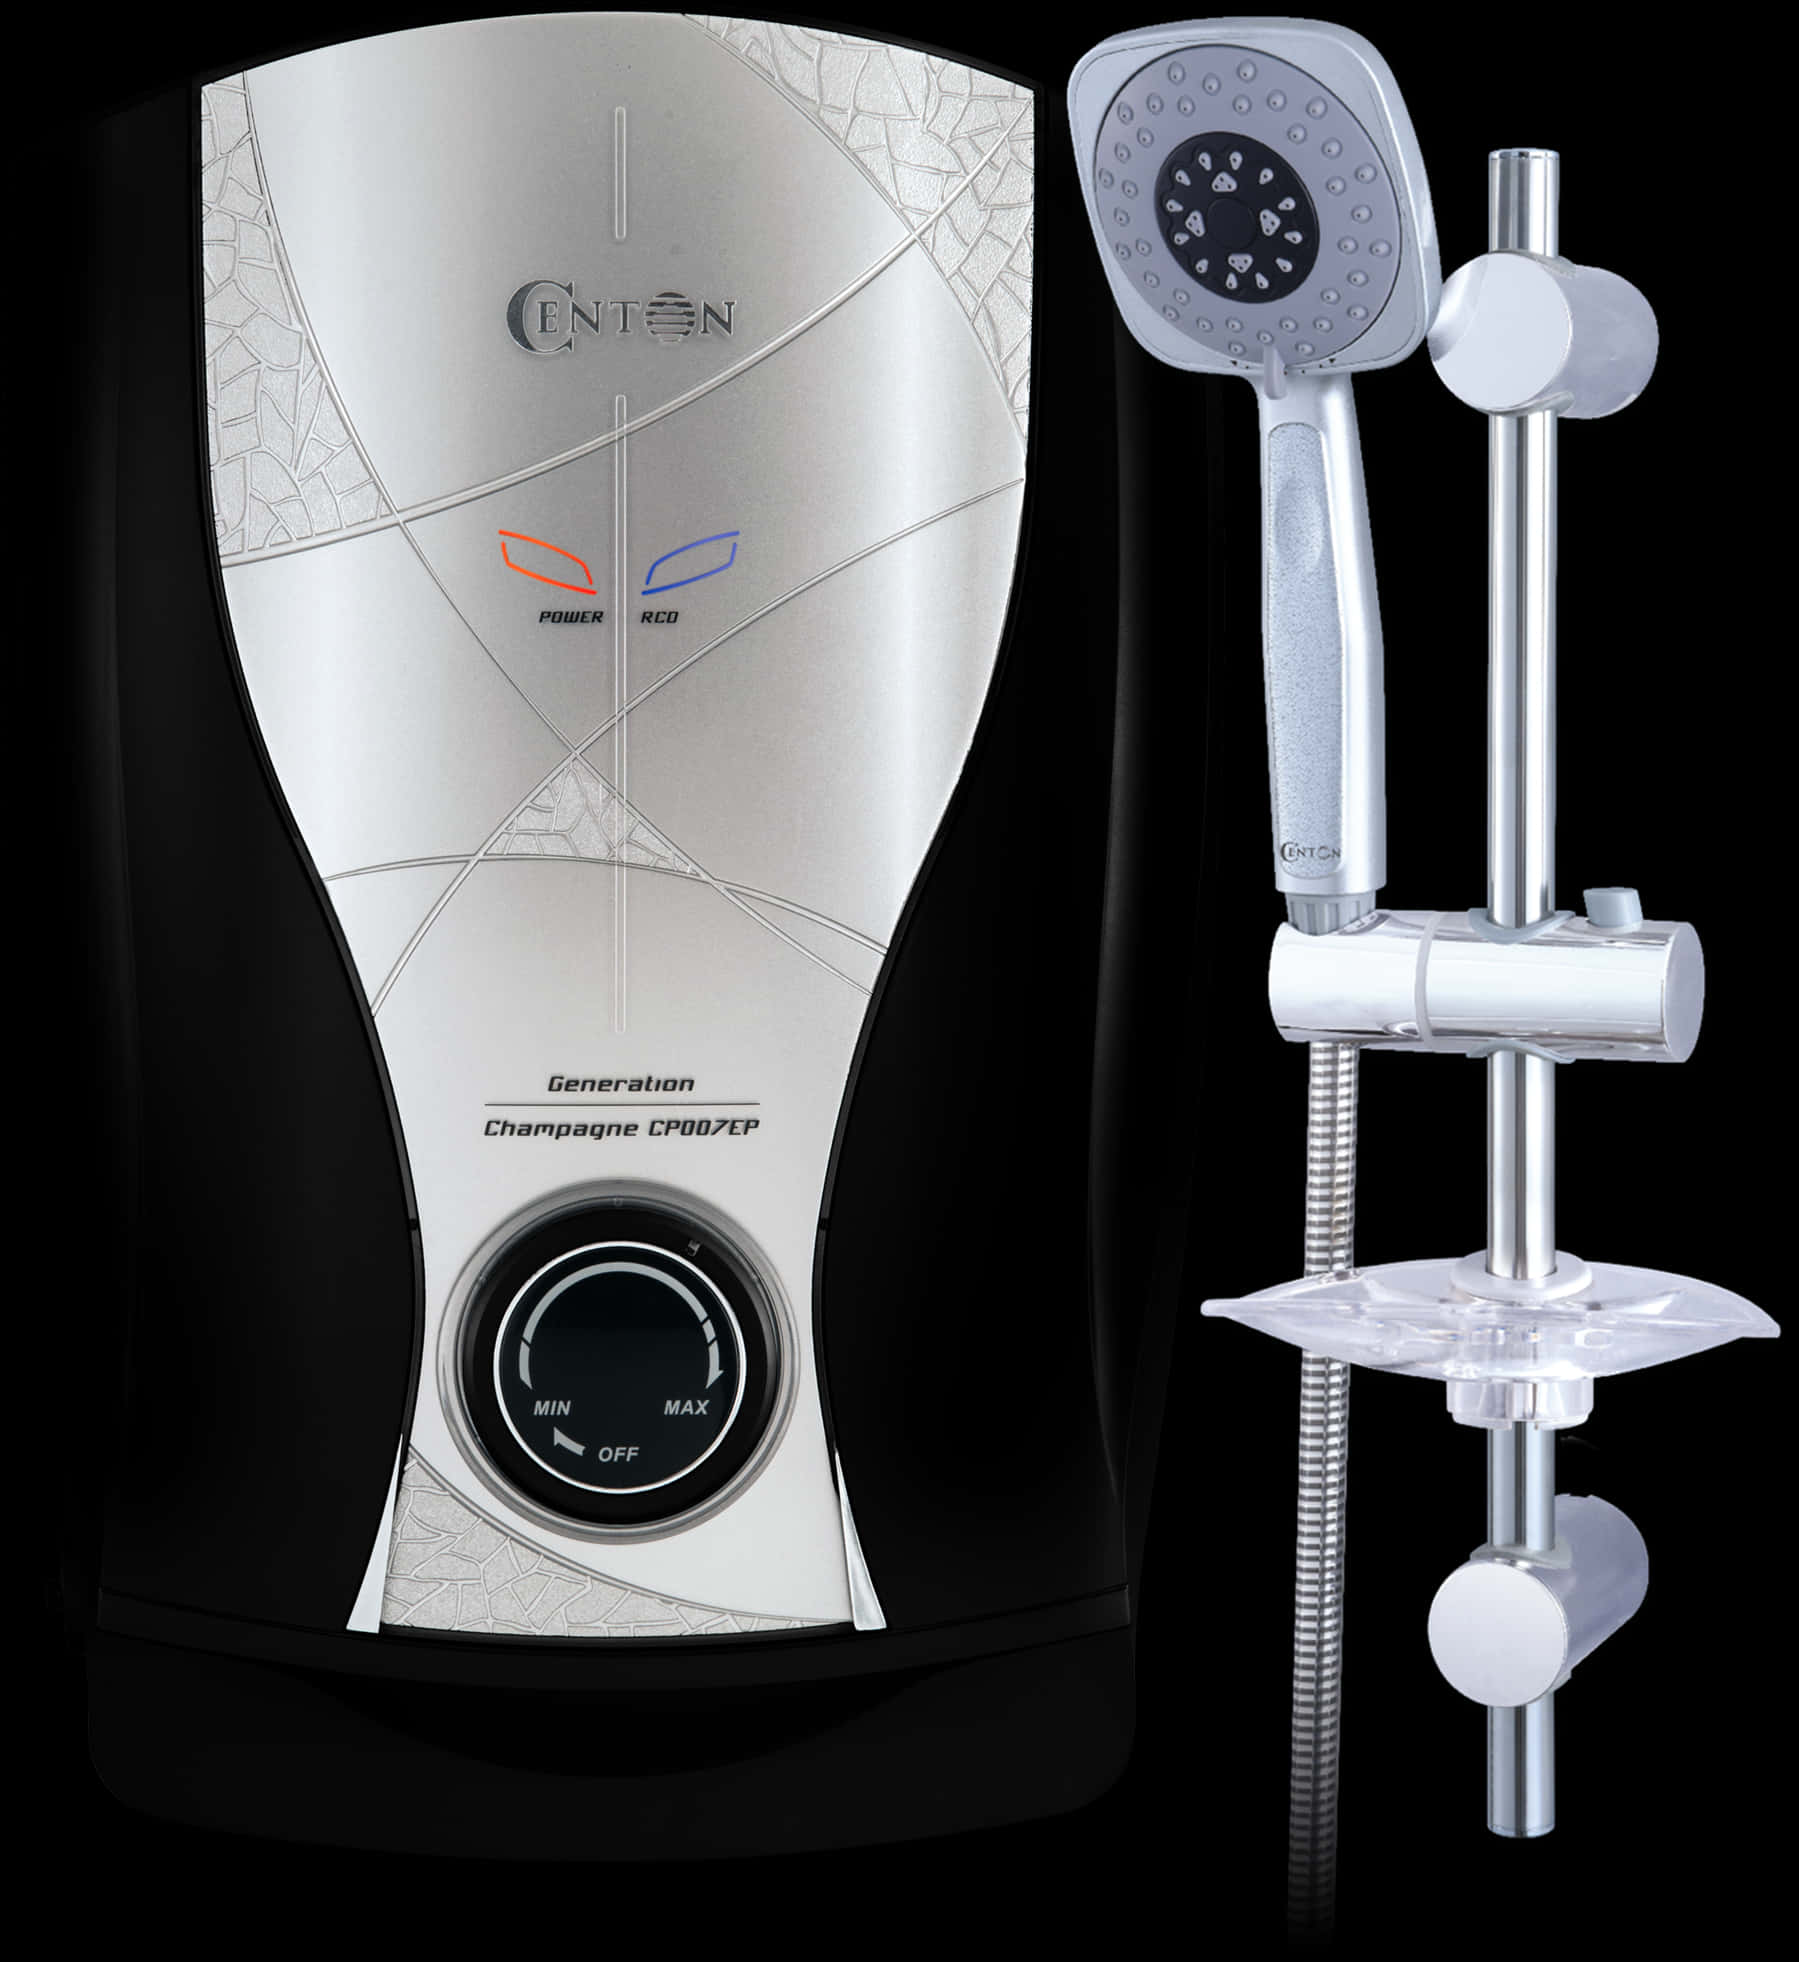 Centon Champagne Instant Water Heater Shower Handset - Lecston Water Heater Okido, Hd Png Download